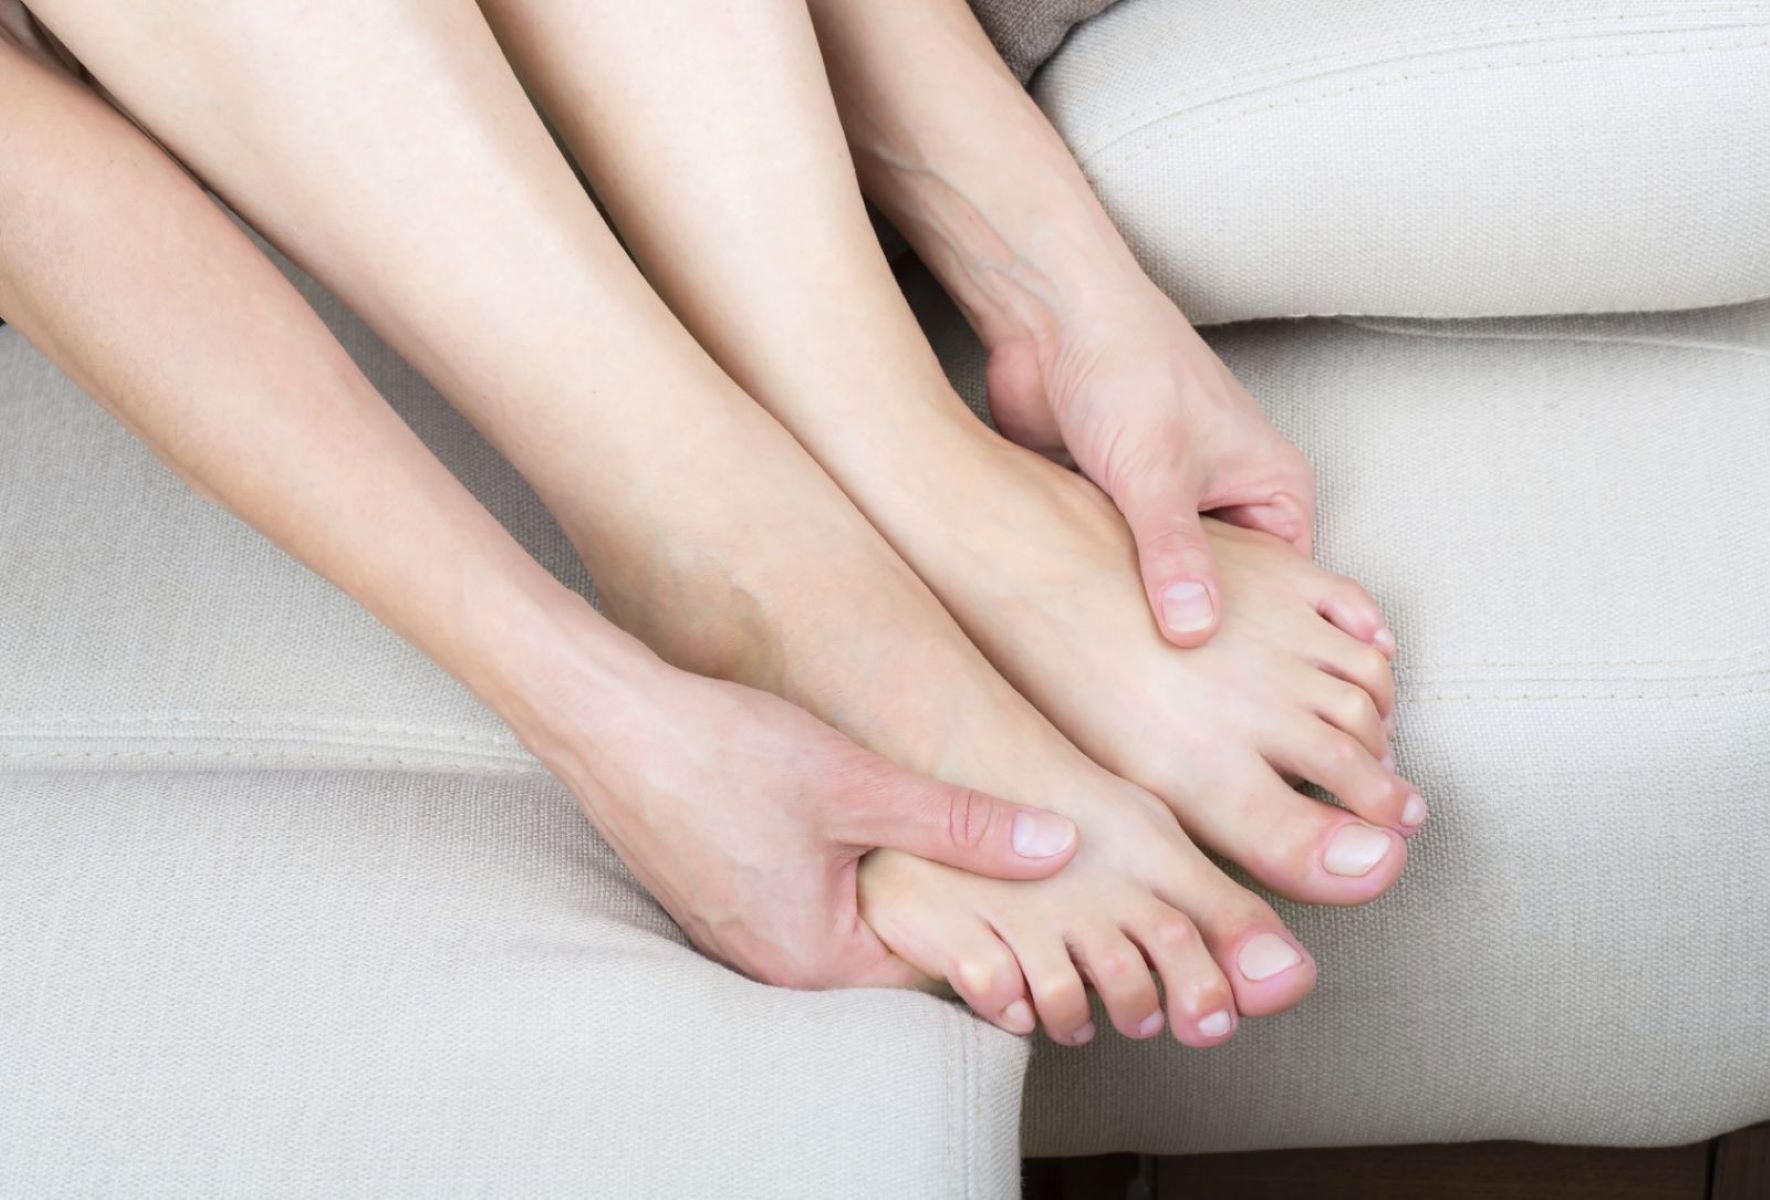 The Ultimate Foot Pleasure: My Unforgettable Experience